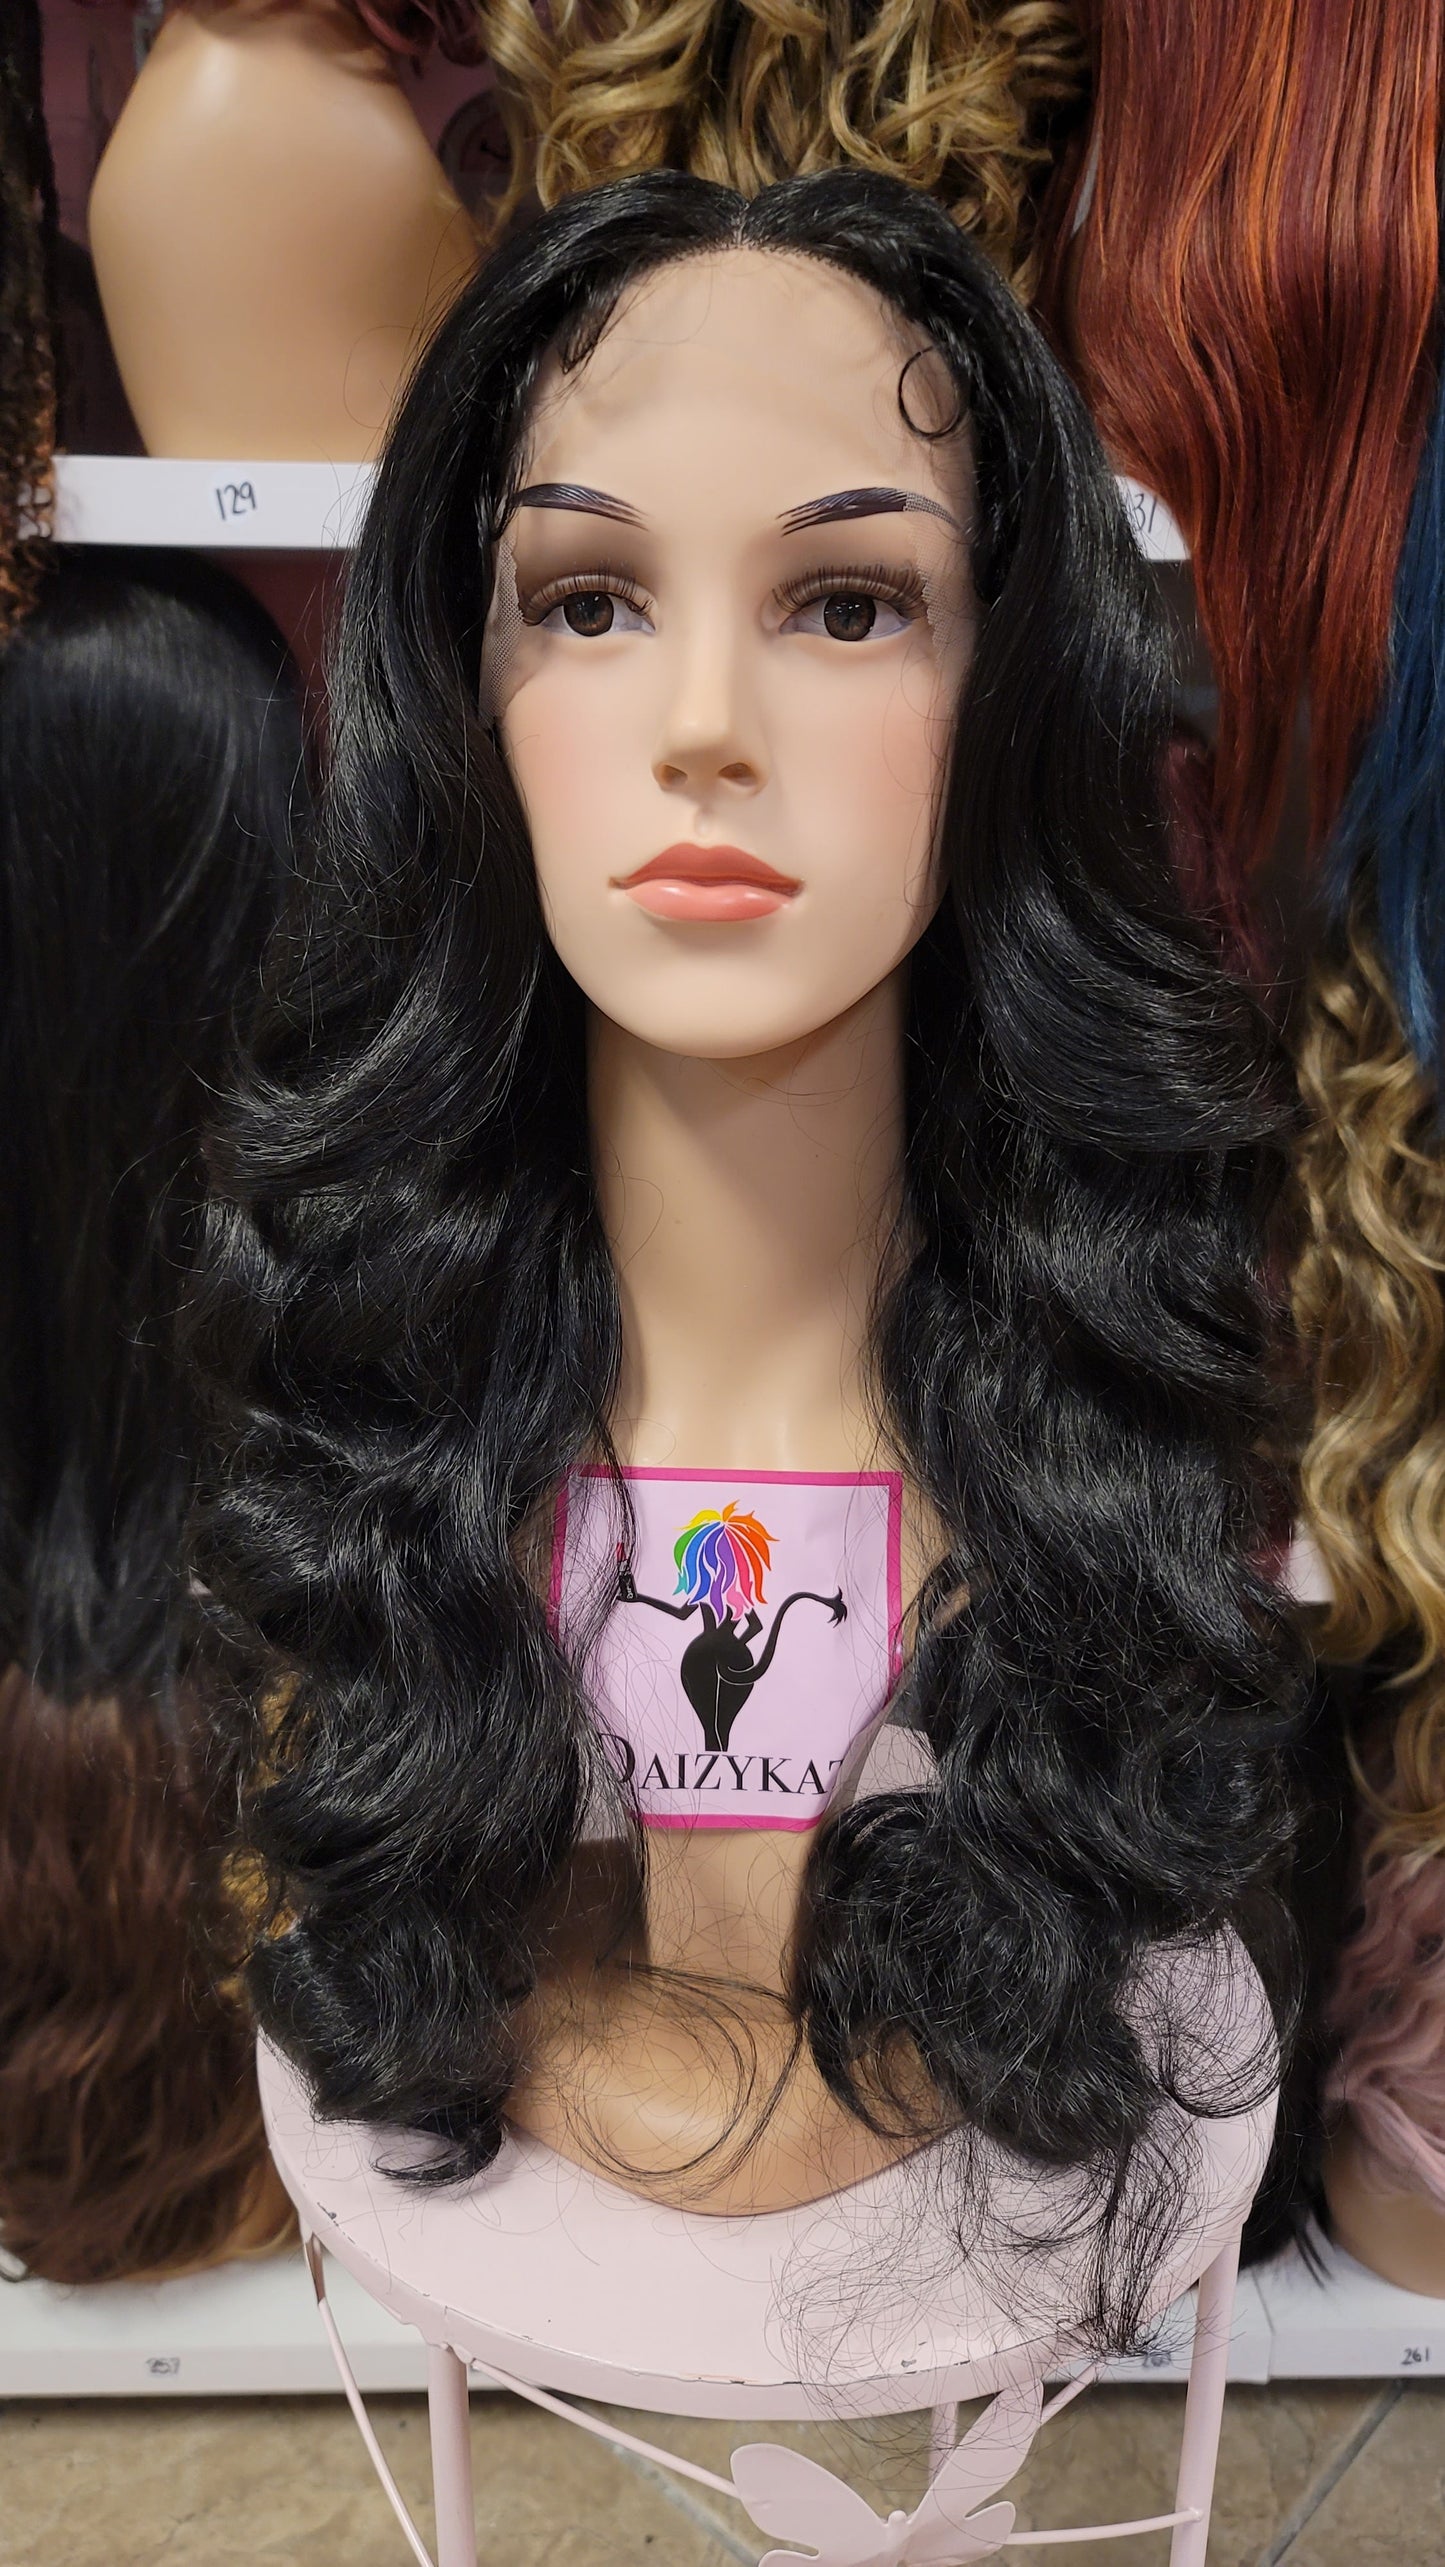 455 Sapphire - Middle Part Lace Front Wig - 1B - DaizyKat Cosmetics 455 Sapphire - Middle Part Lace Front Wig - 1B DaizyKat Cosmetics Wigs